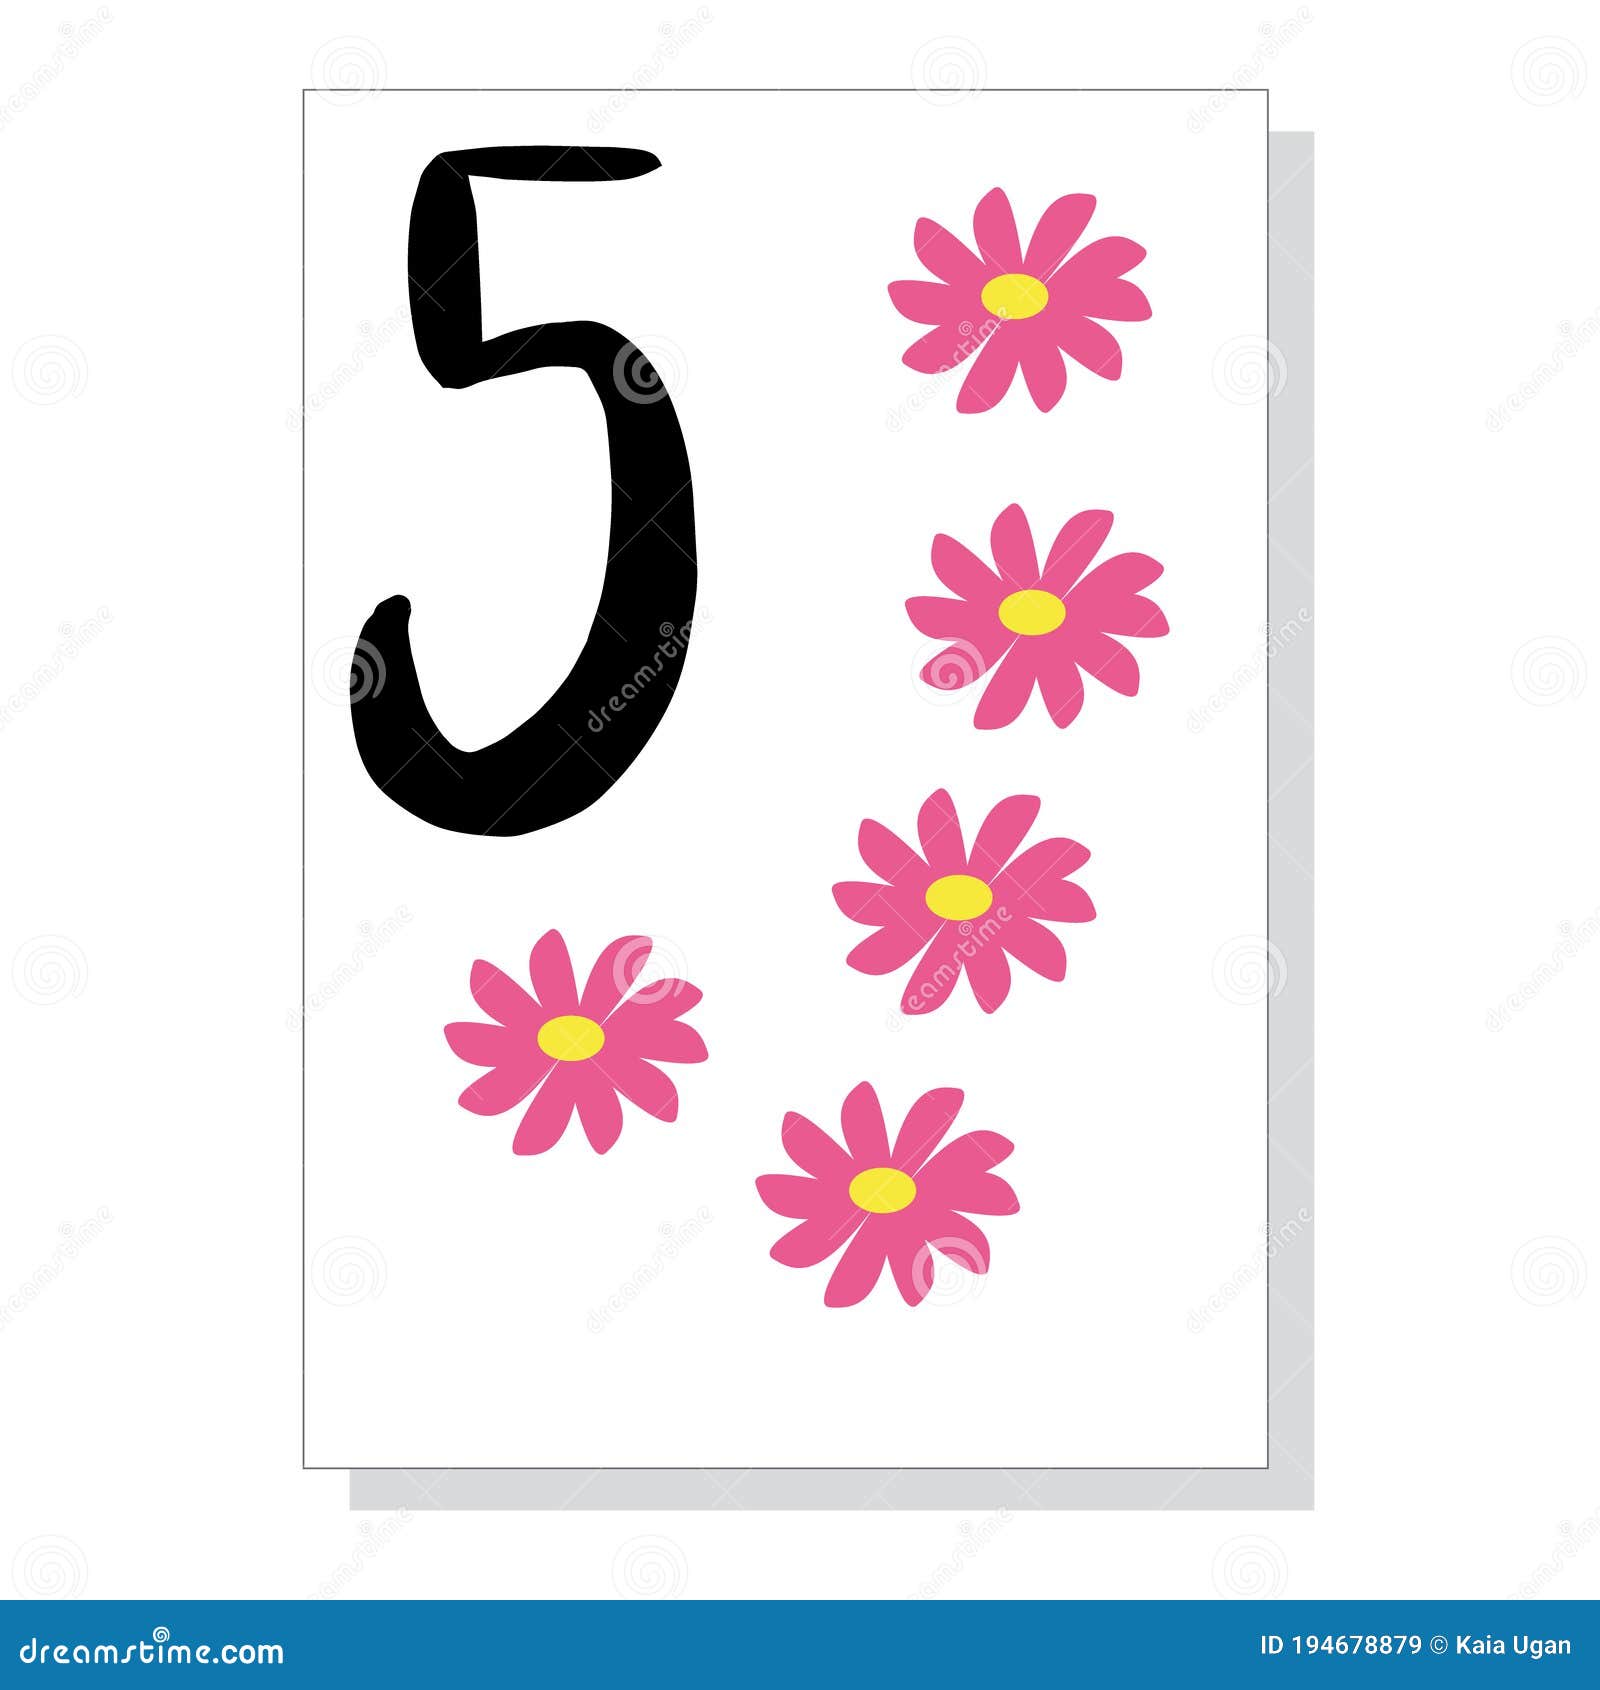 printable flashcard for numbers for children. for preschool and kindergarten kids learning numbers, to count to deduct, to decide